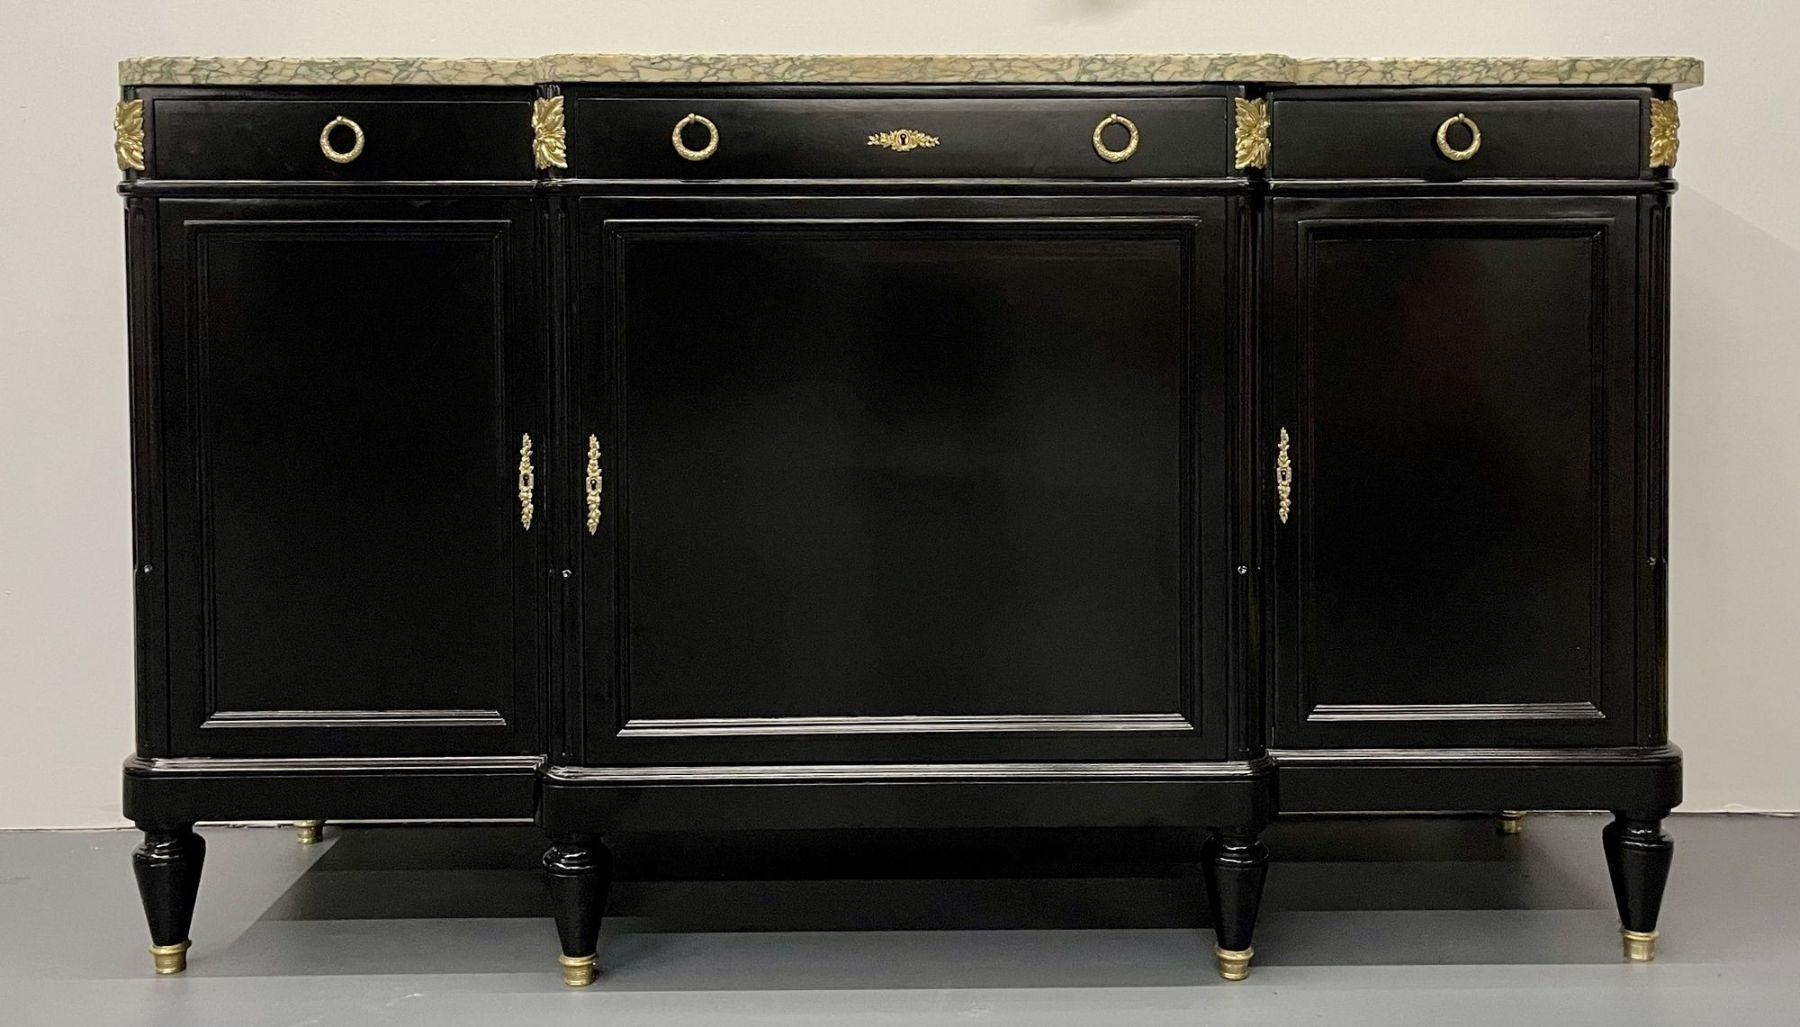 Hollywood Regency Style Commode, Chest, or Sideboard, Louis XVI, Bronze, French. 19th Century
Louis XVI commode fully refinished in a premium black satin finished with newly cleaned original exceptionally well cast Bronze mounts. This stunning